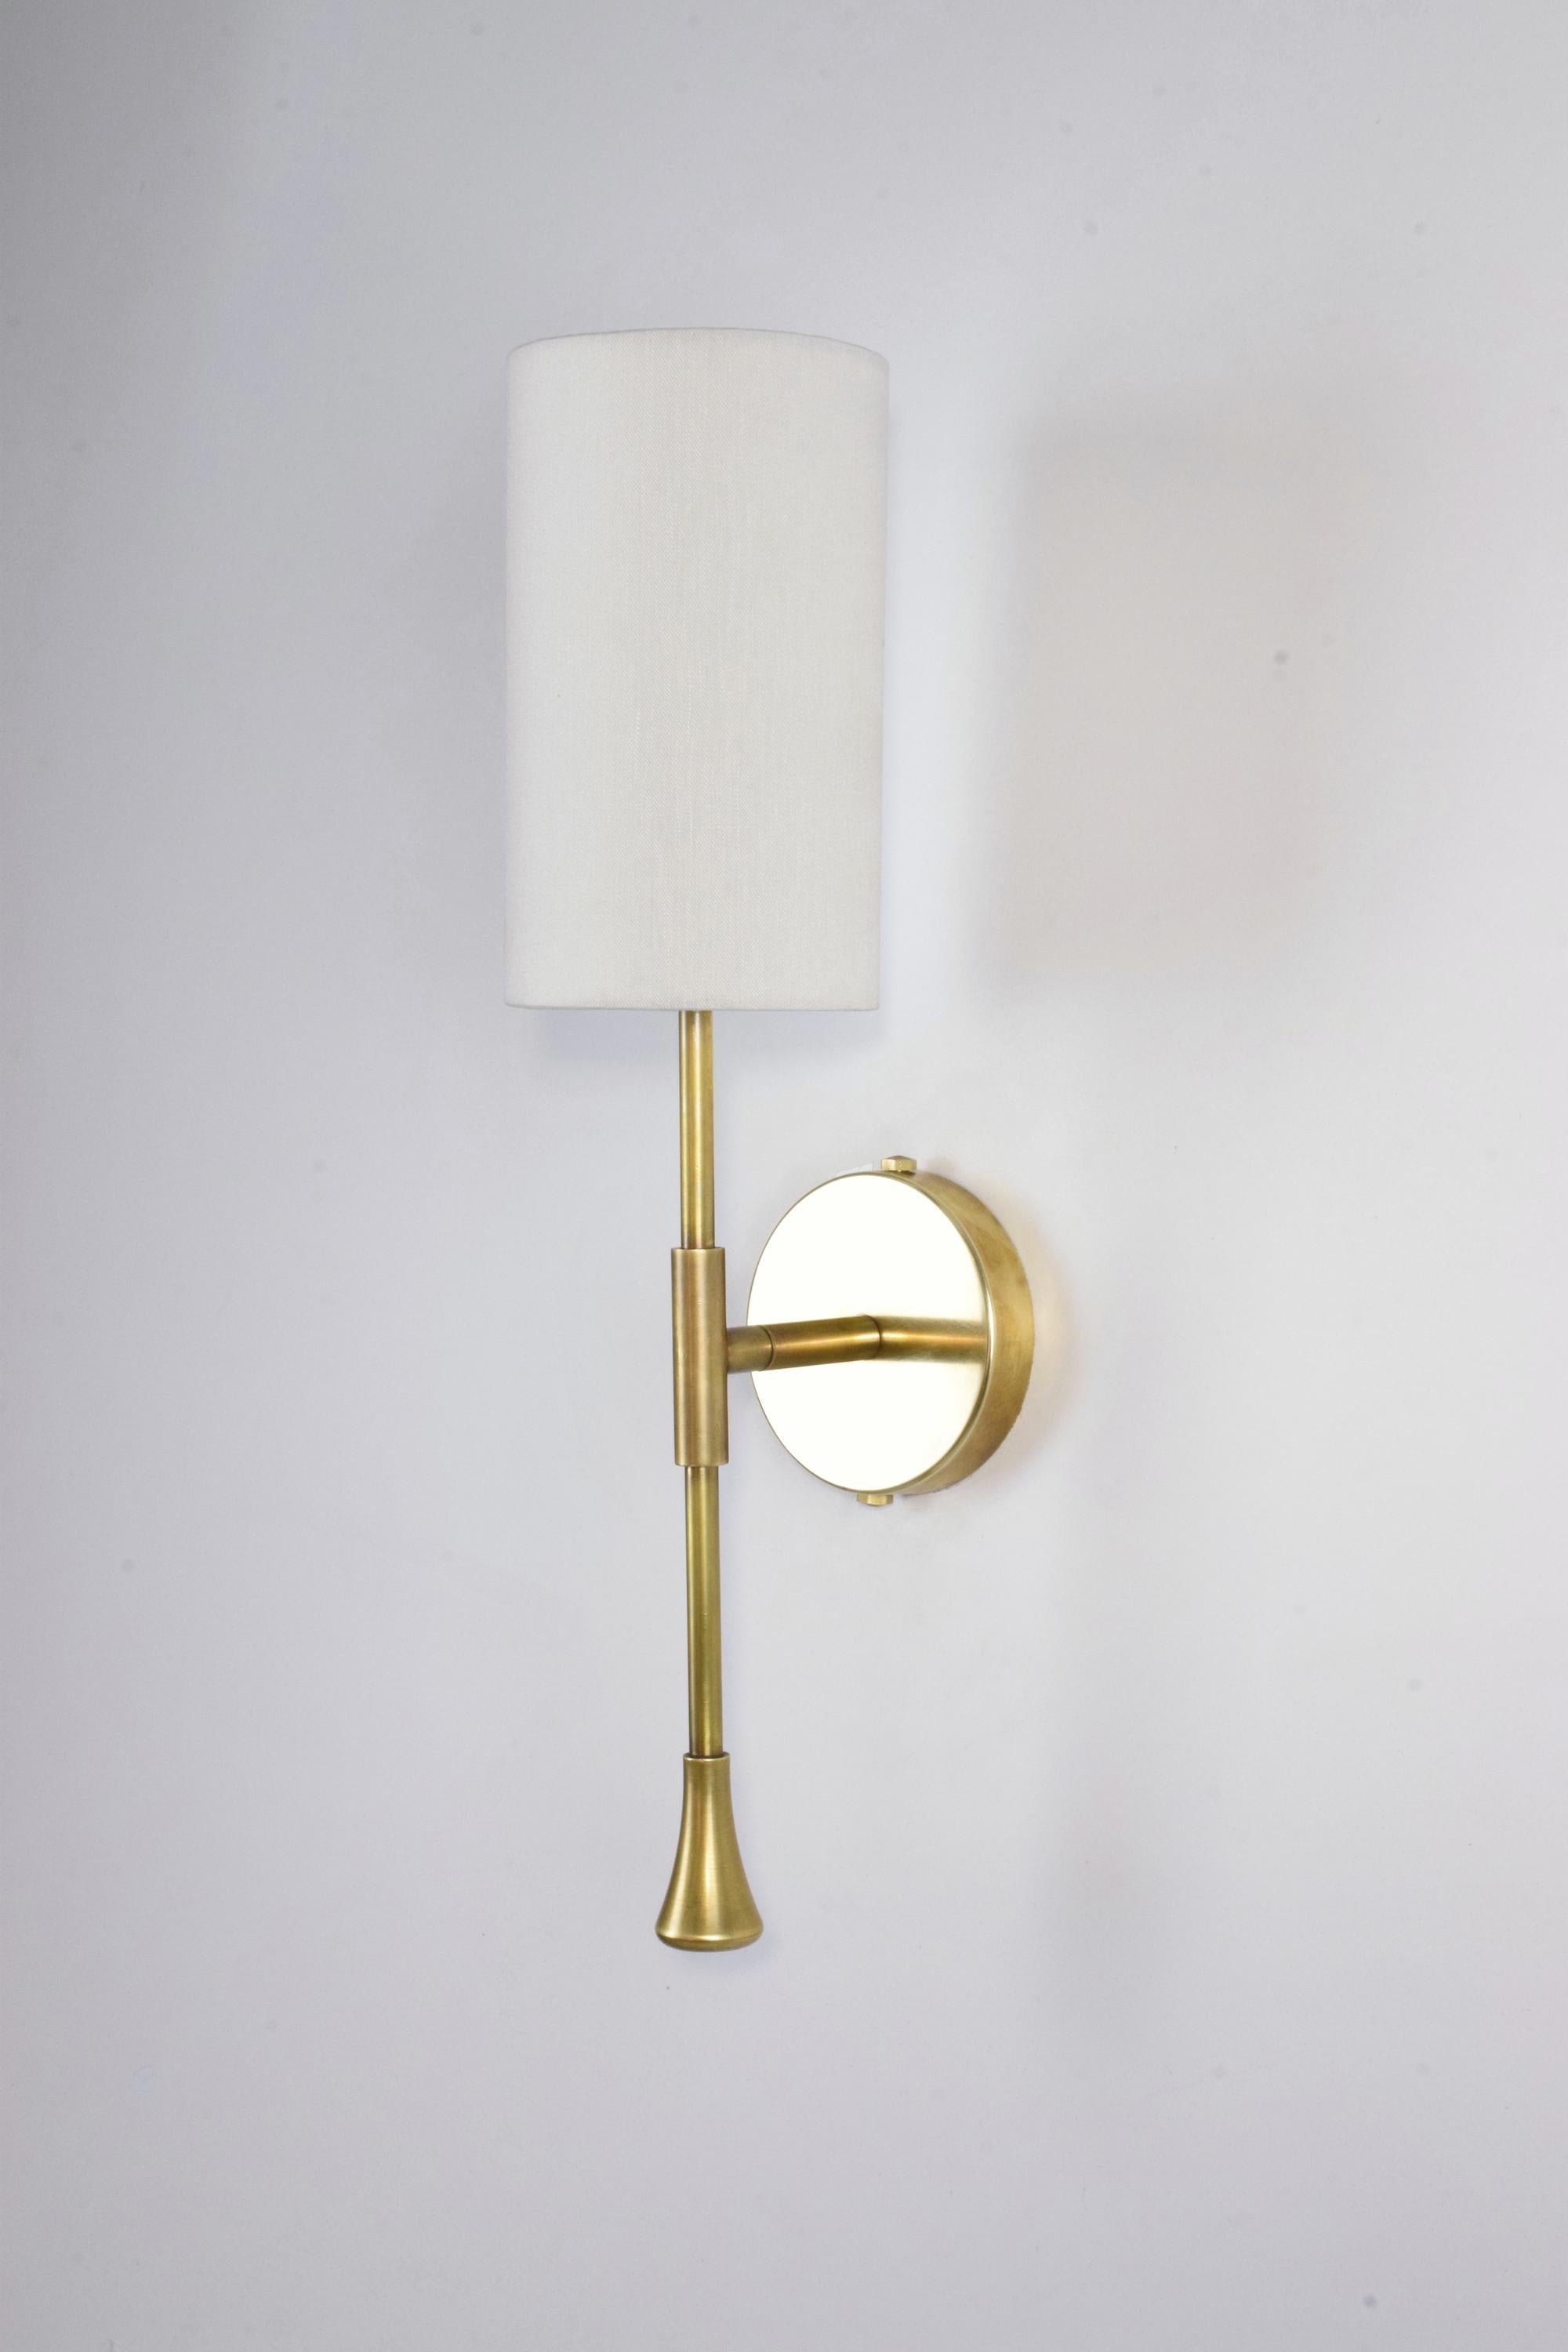 DAYA-W Brass Wall Light, Flow 2 Collection In New Condition For Sale In Paris, FR